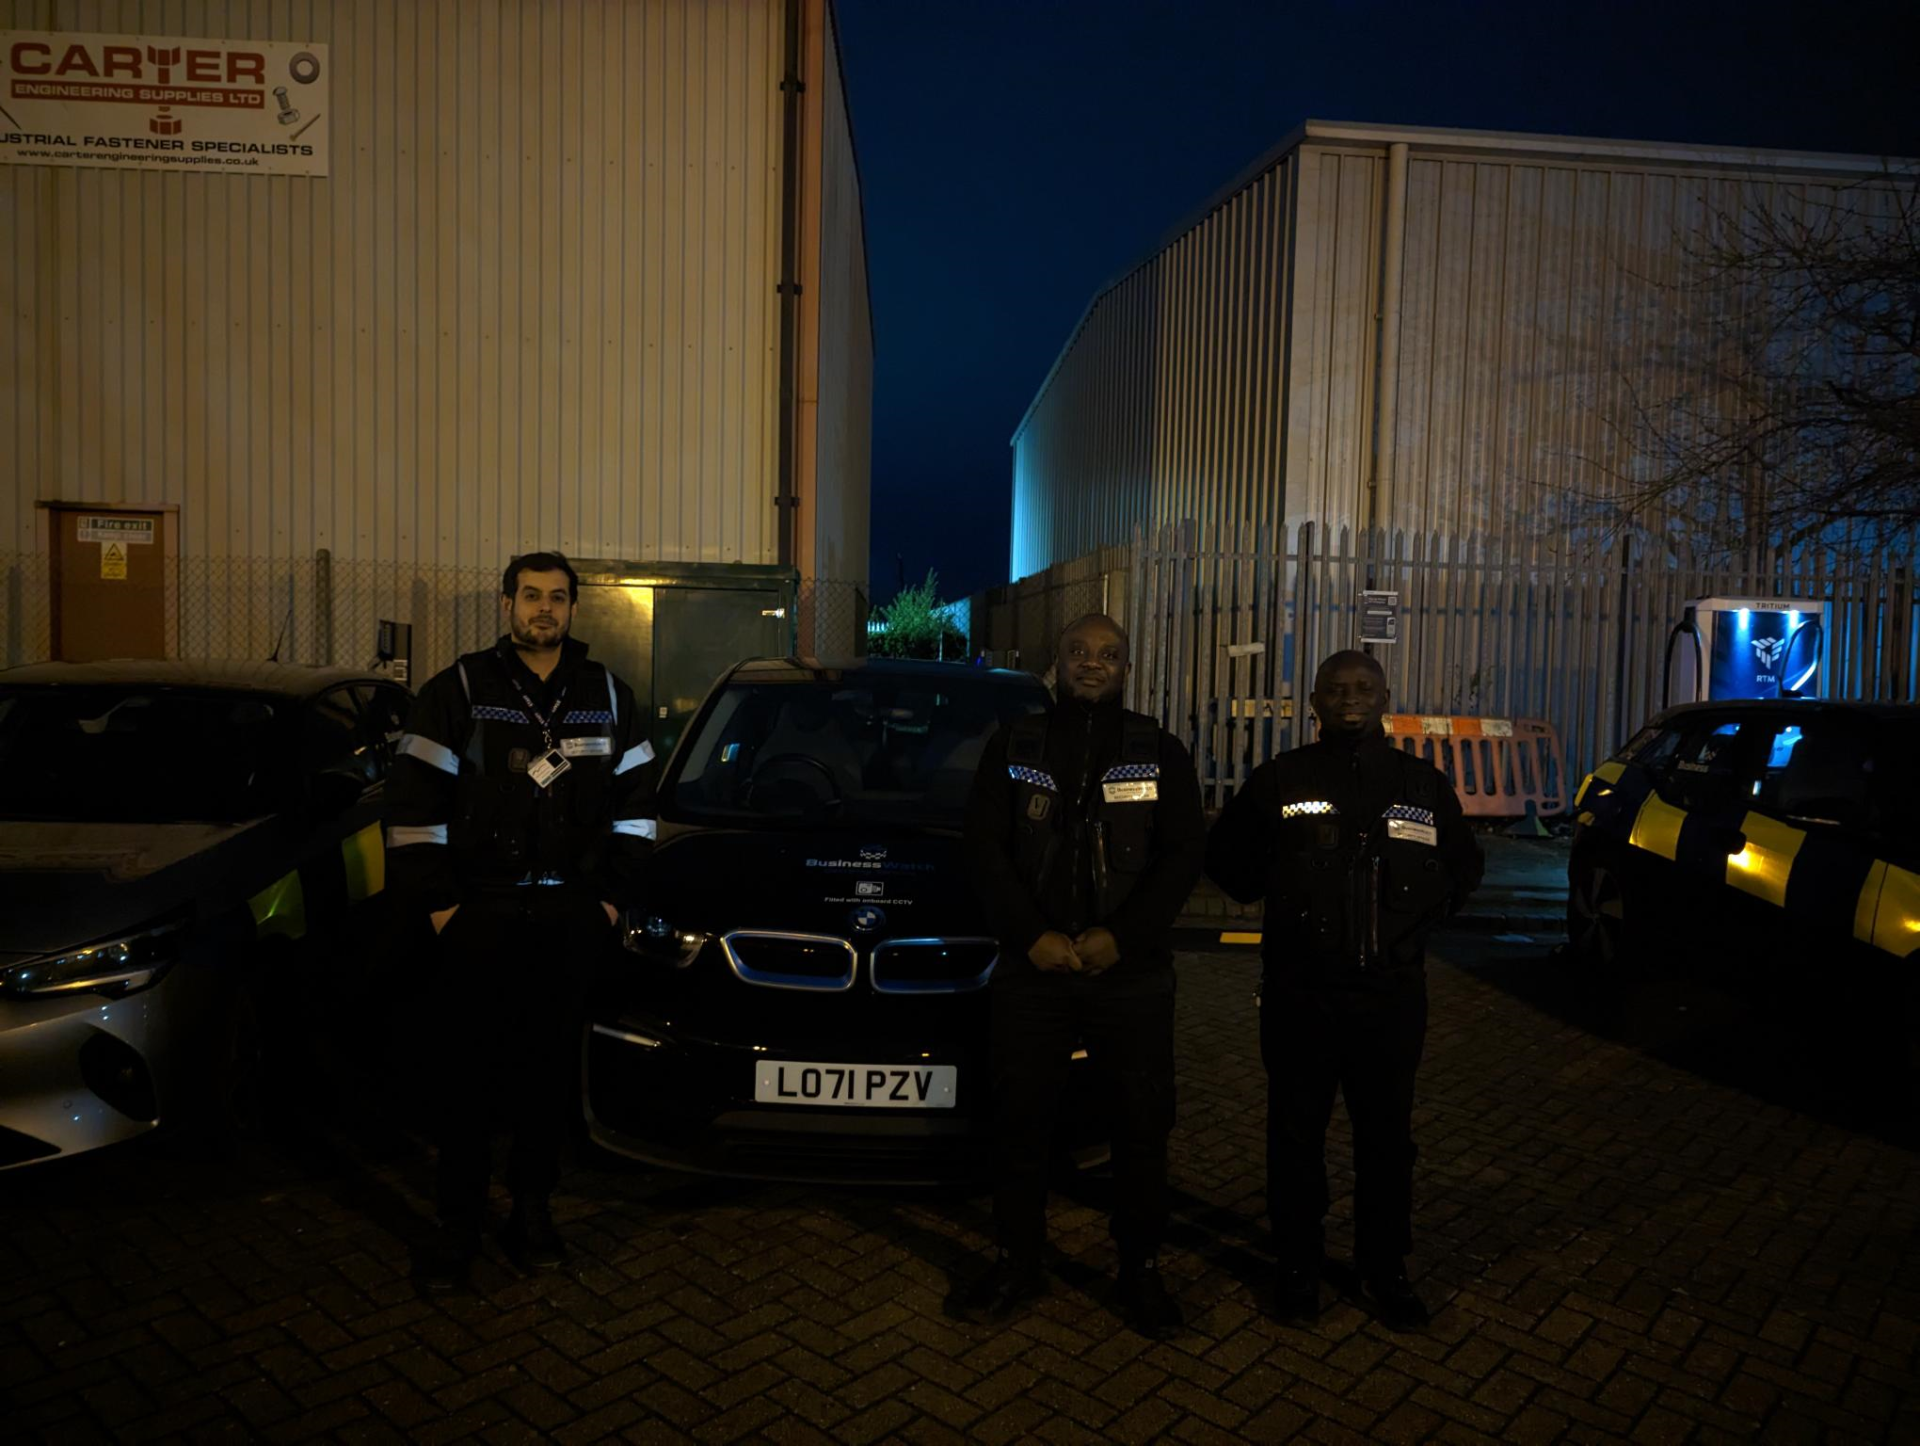 What are Mobile Security Patrols?